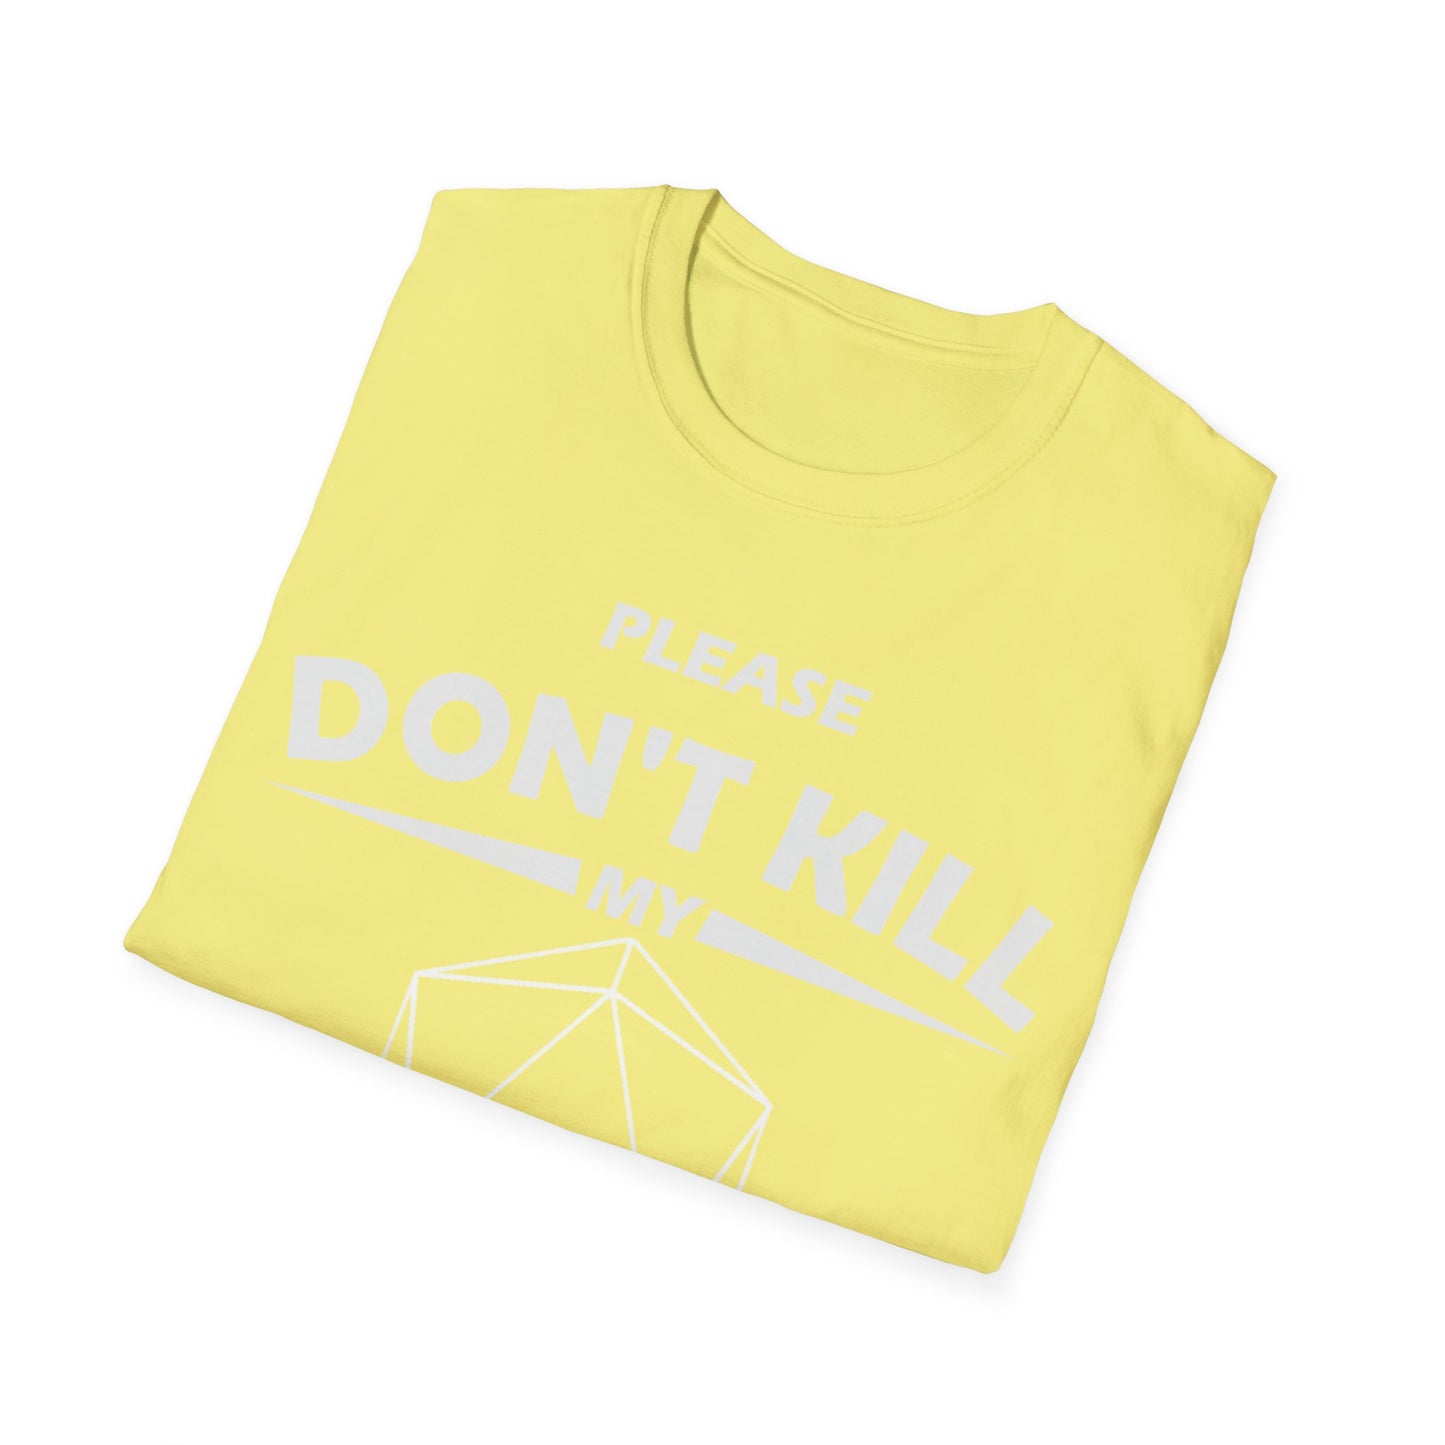 Please Don't Kill My Cleric - White - Unisex Softstyle T-Shirt